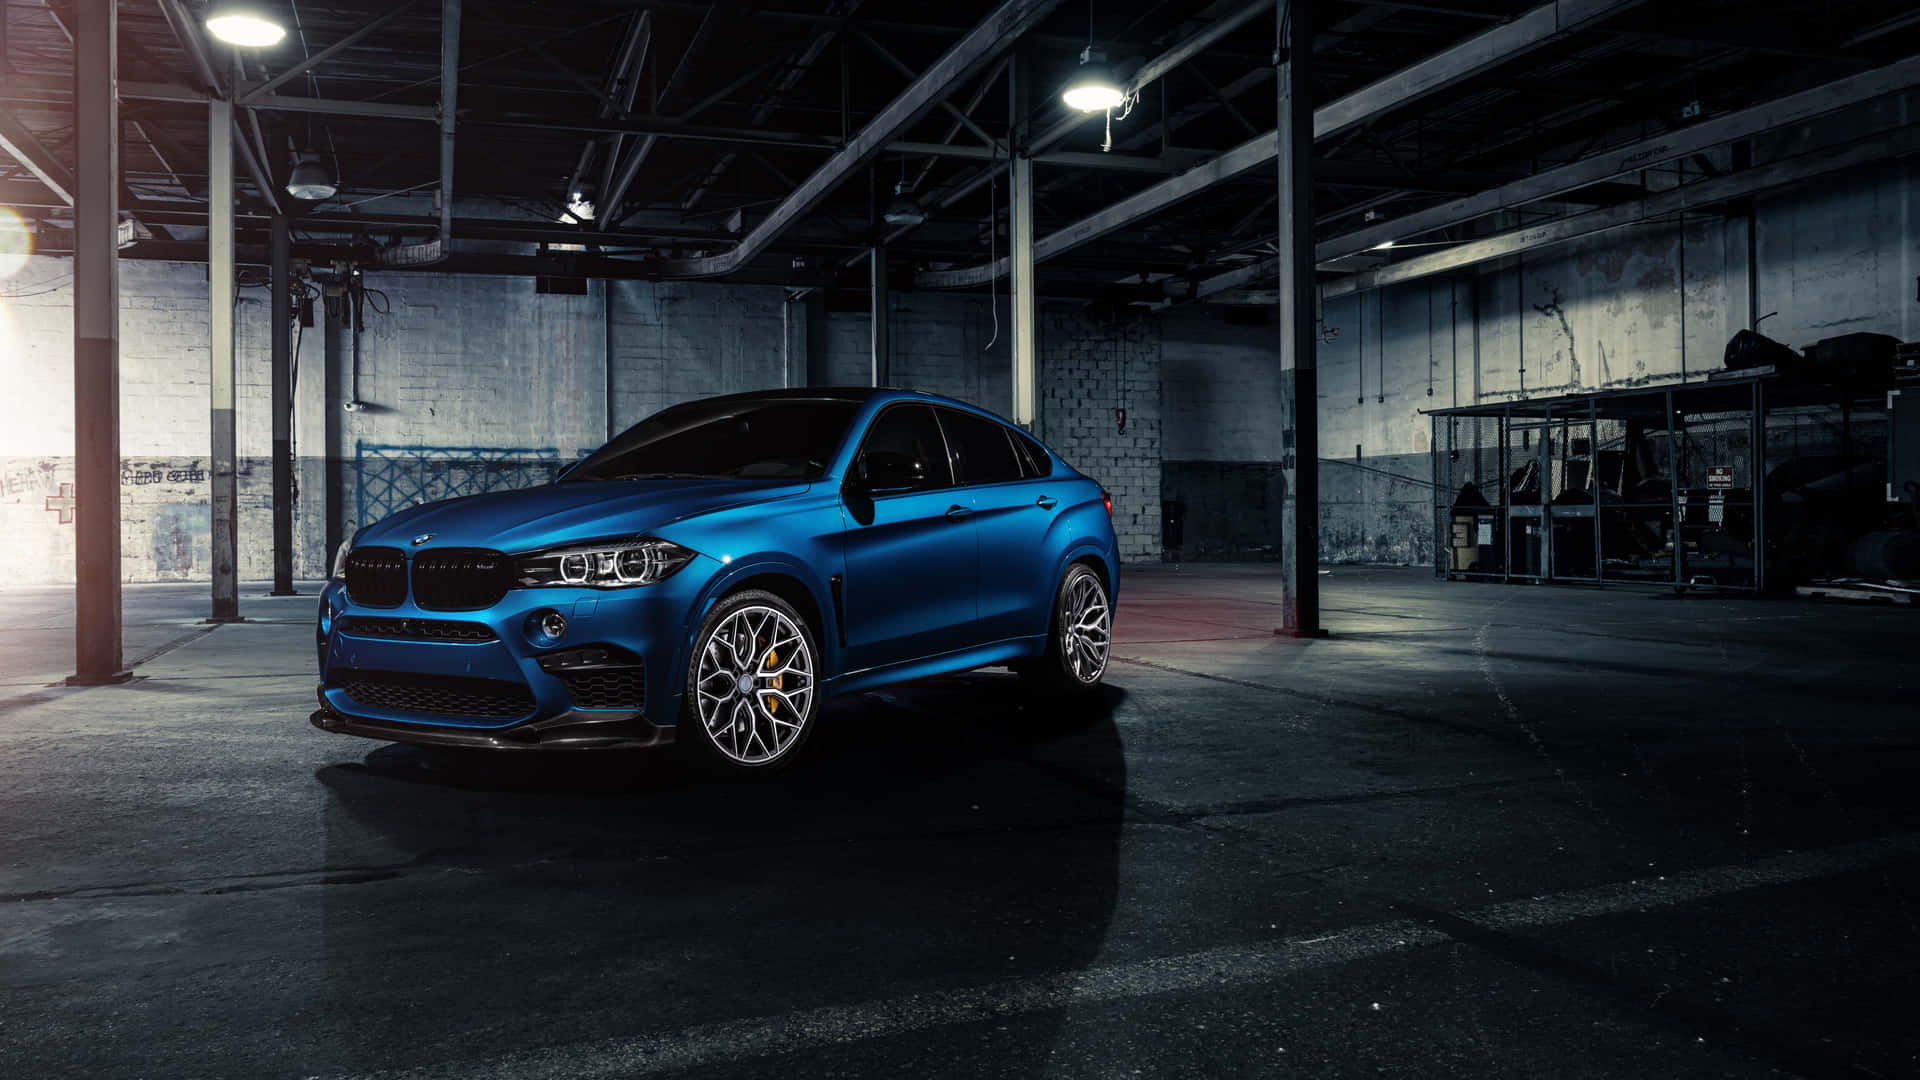 The BMW X6 M provides a unique combination of performance and luxury on the road.